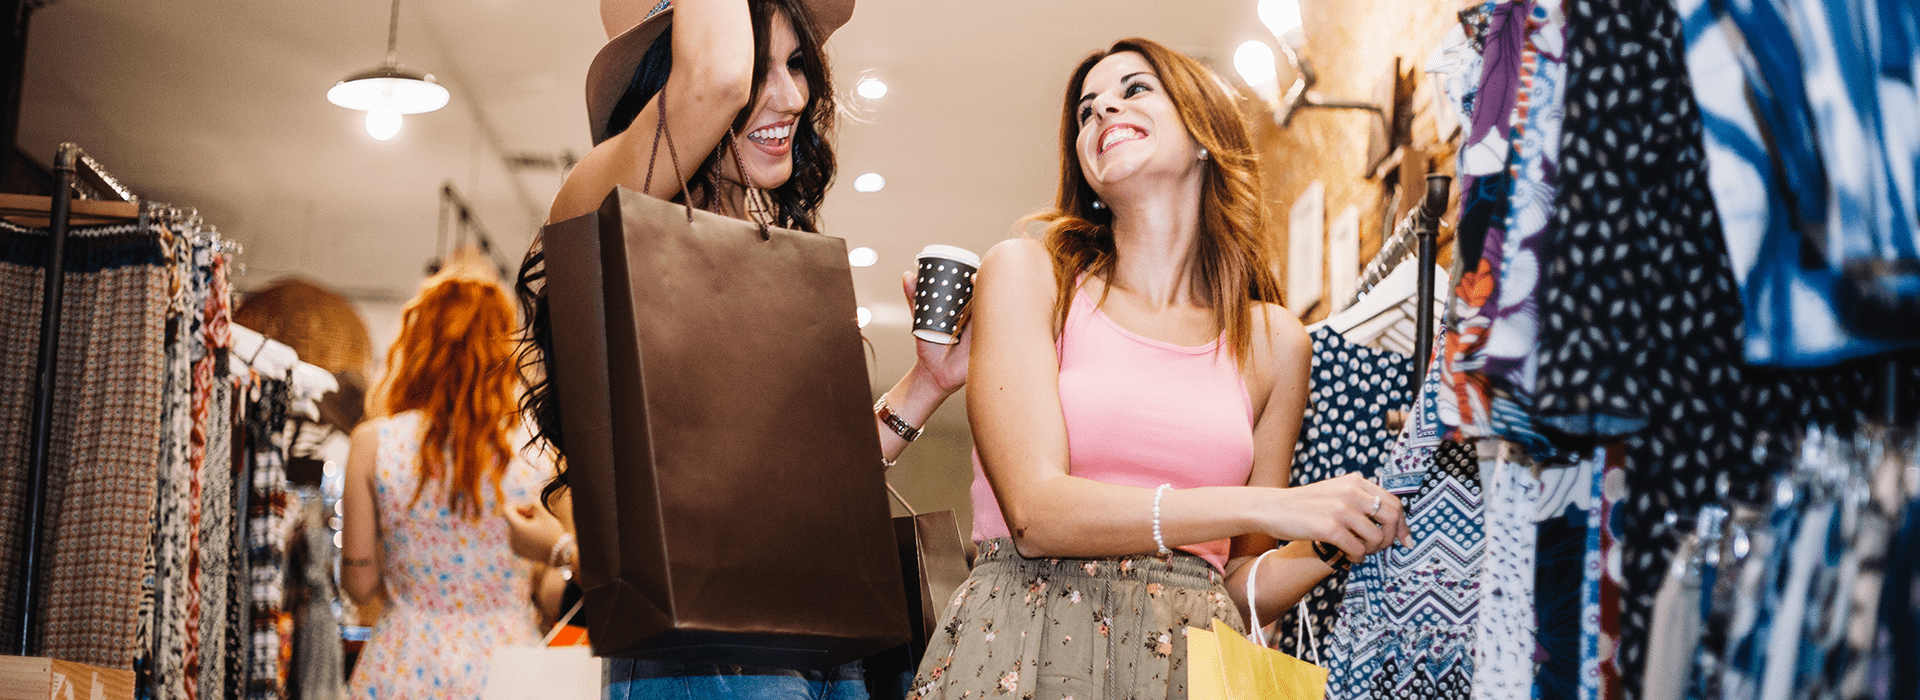 9 Ways To Increase Retail Store walk-Ins and Sales | Shop Sales Tips ...